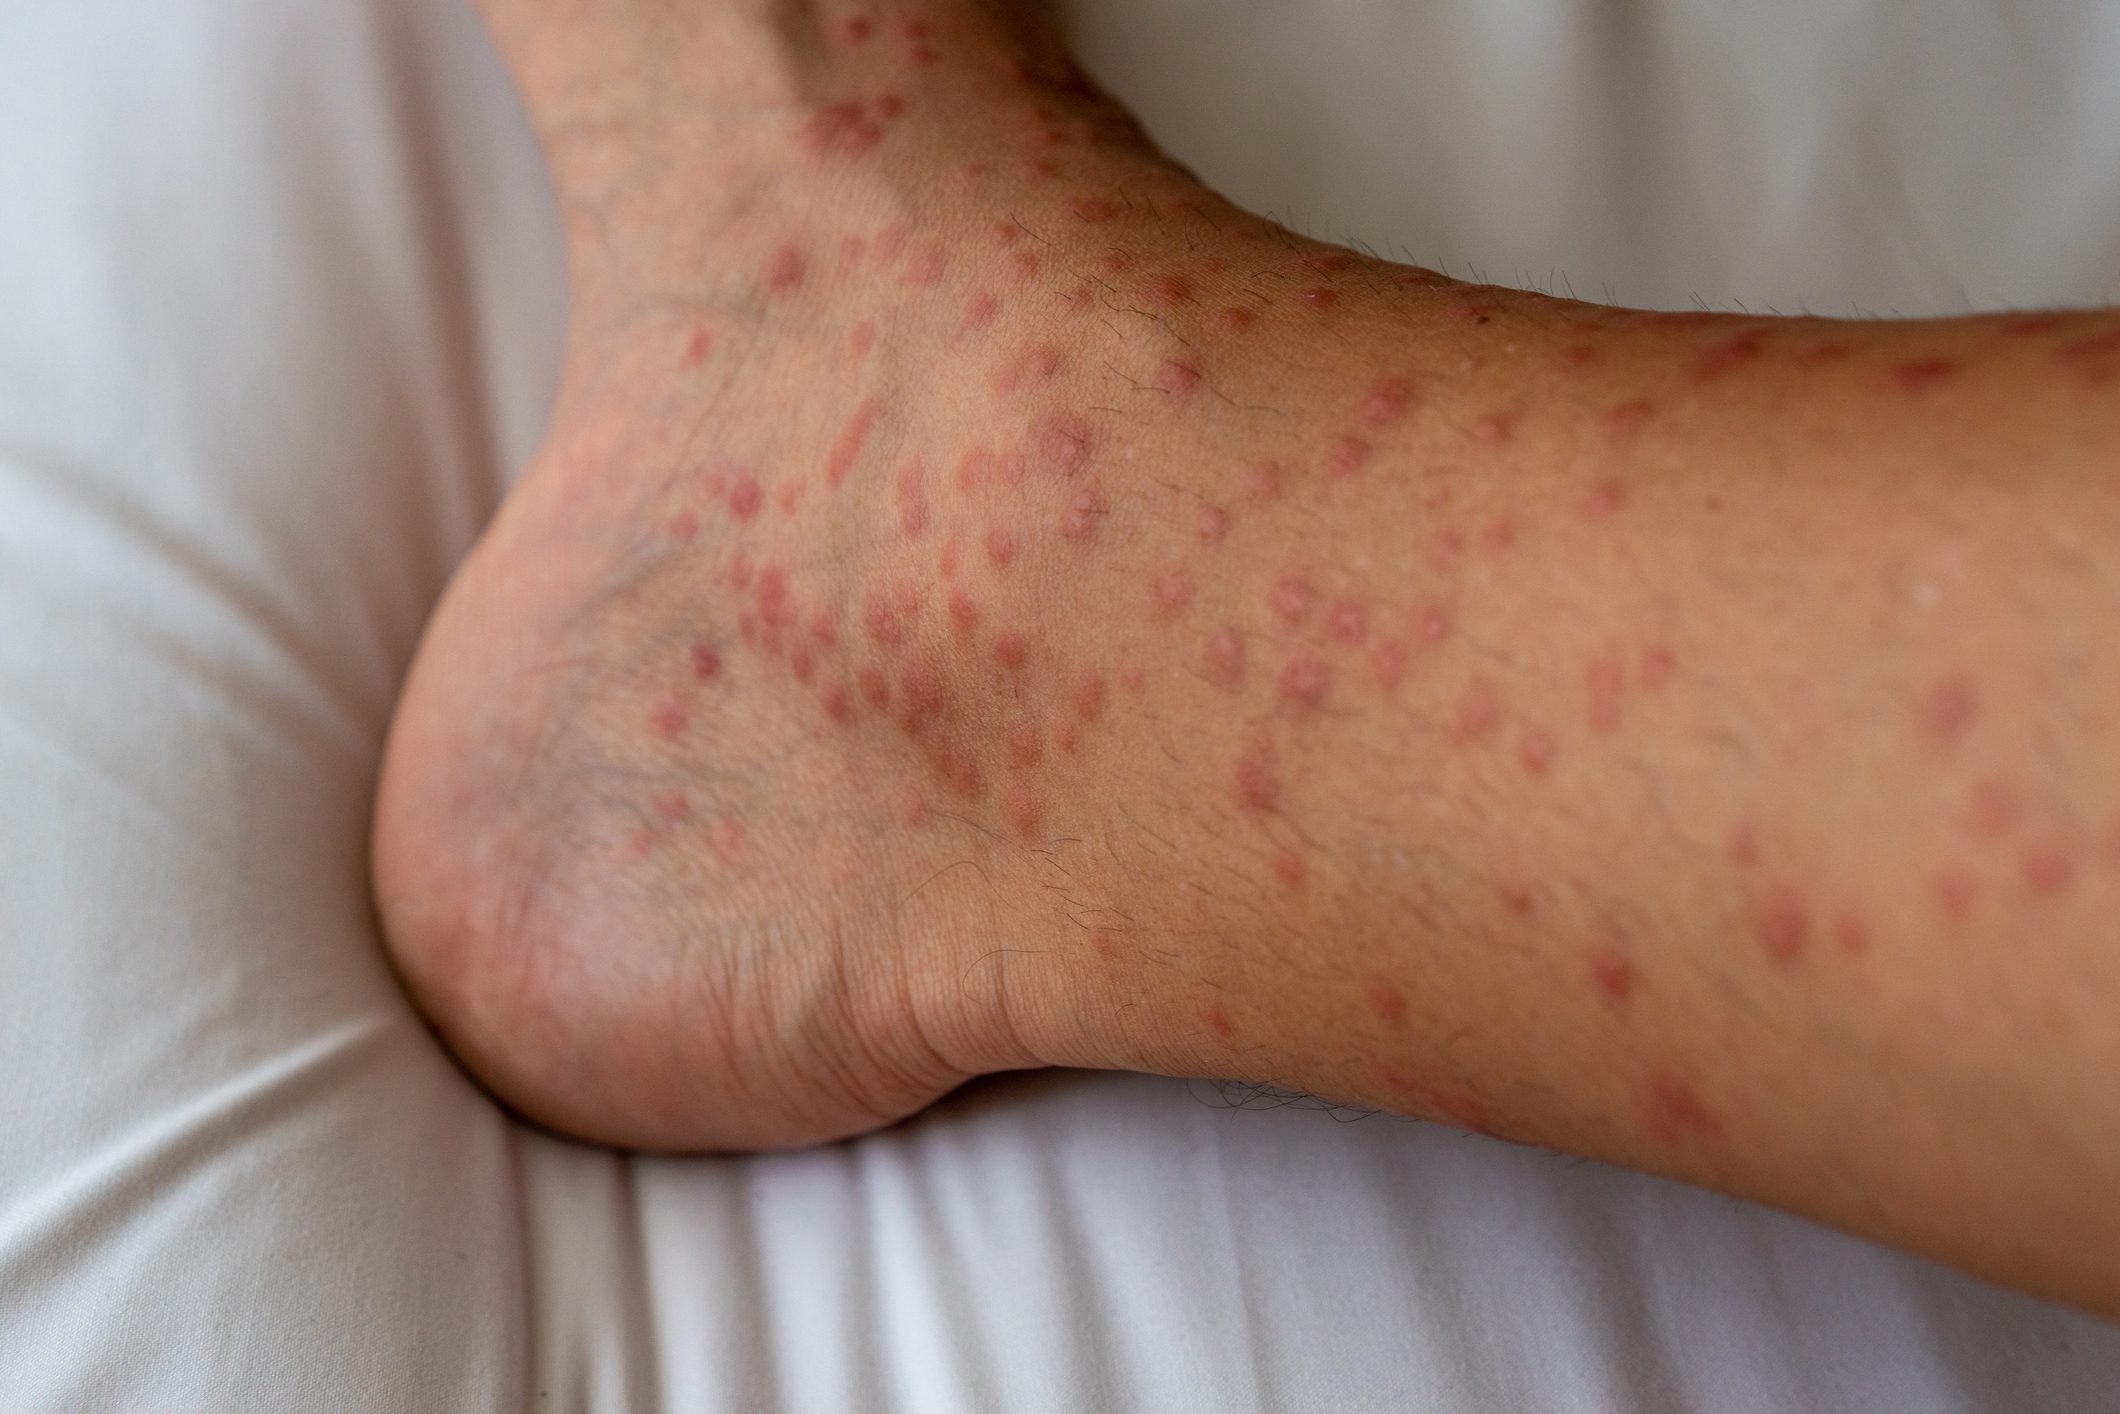 Have a Severe Reaction to a Bug Bite? It Could Be Papular Urticaria